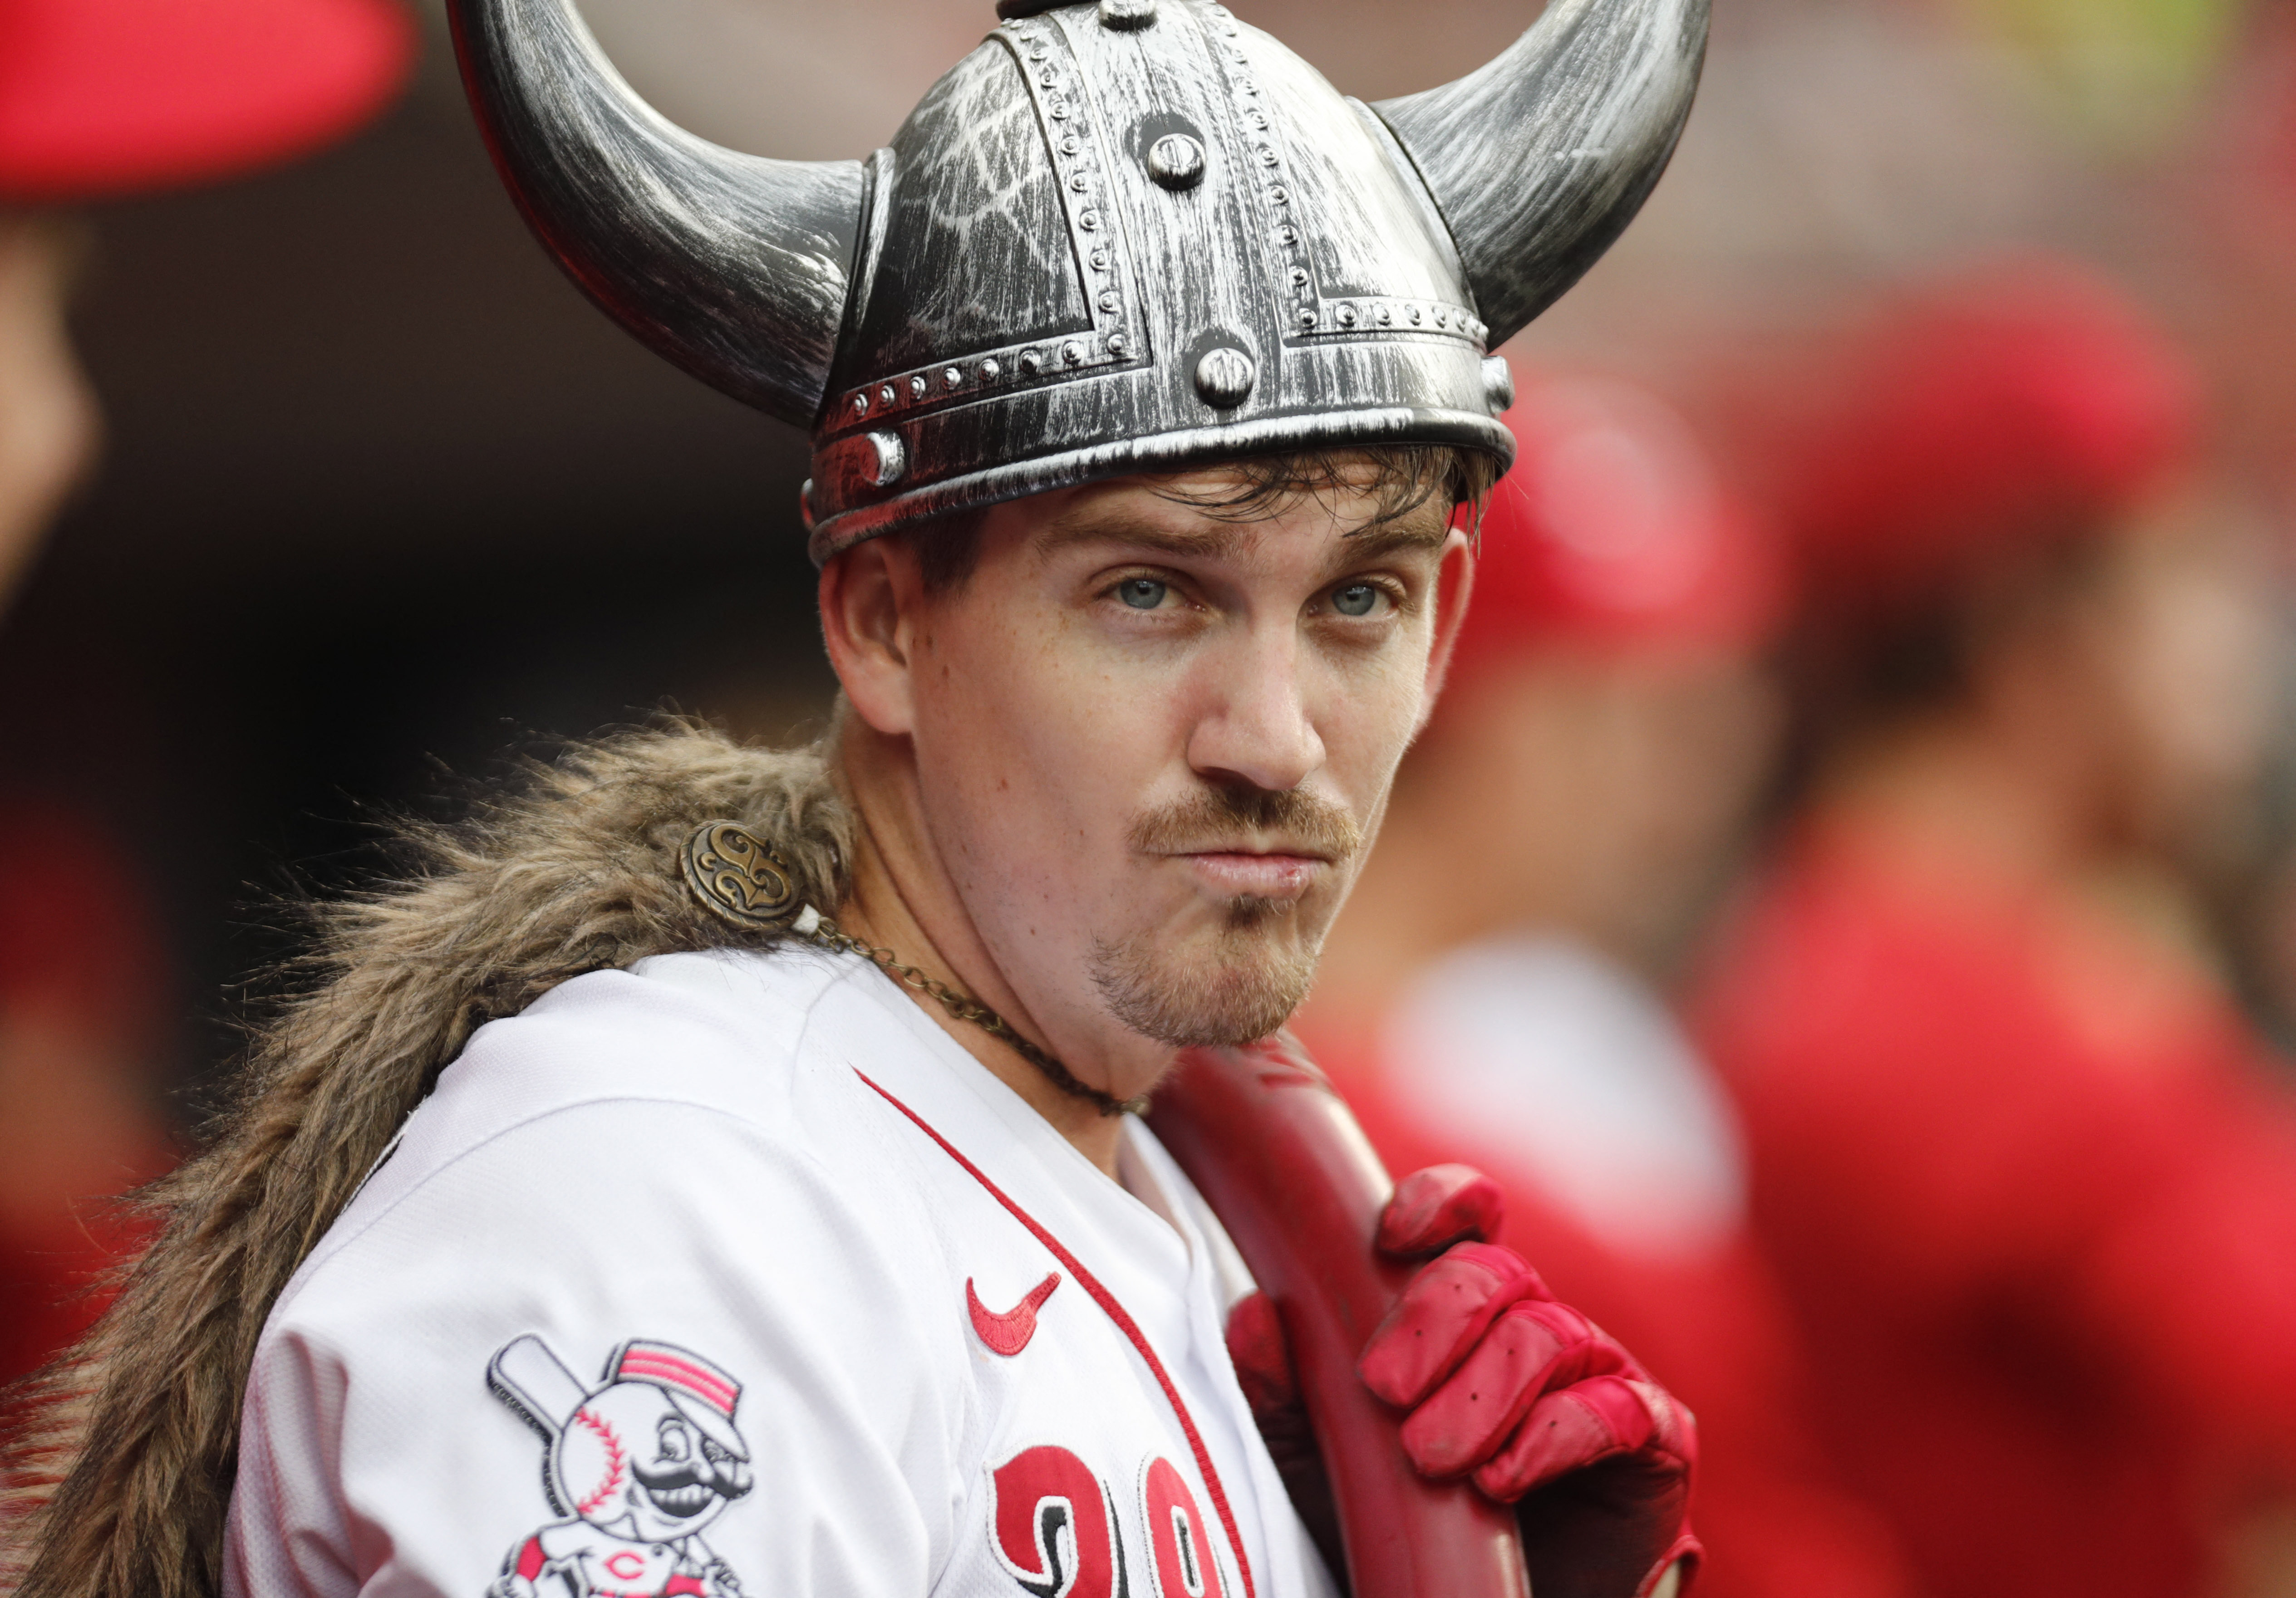 Thoughts on the Reds viking helmet?